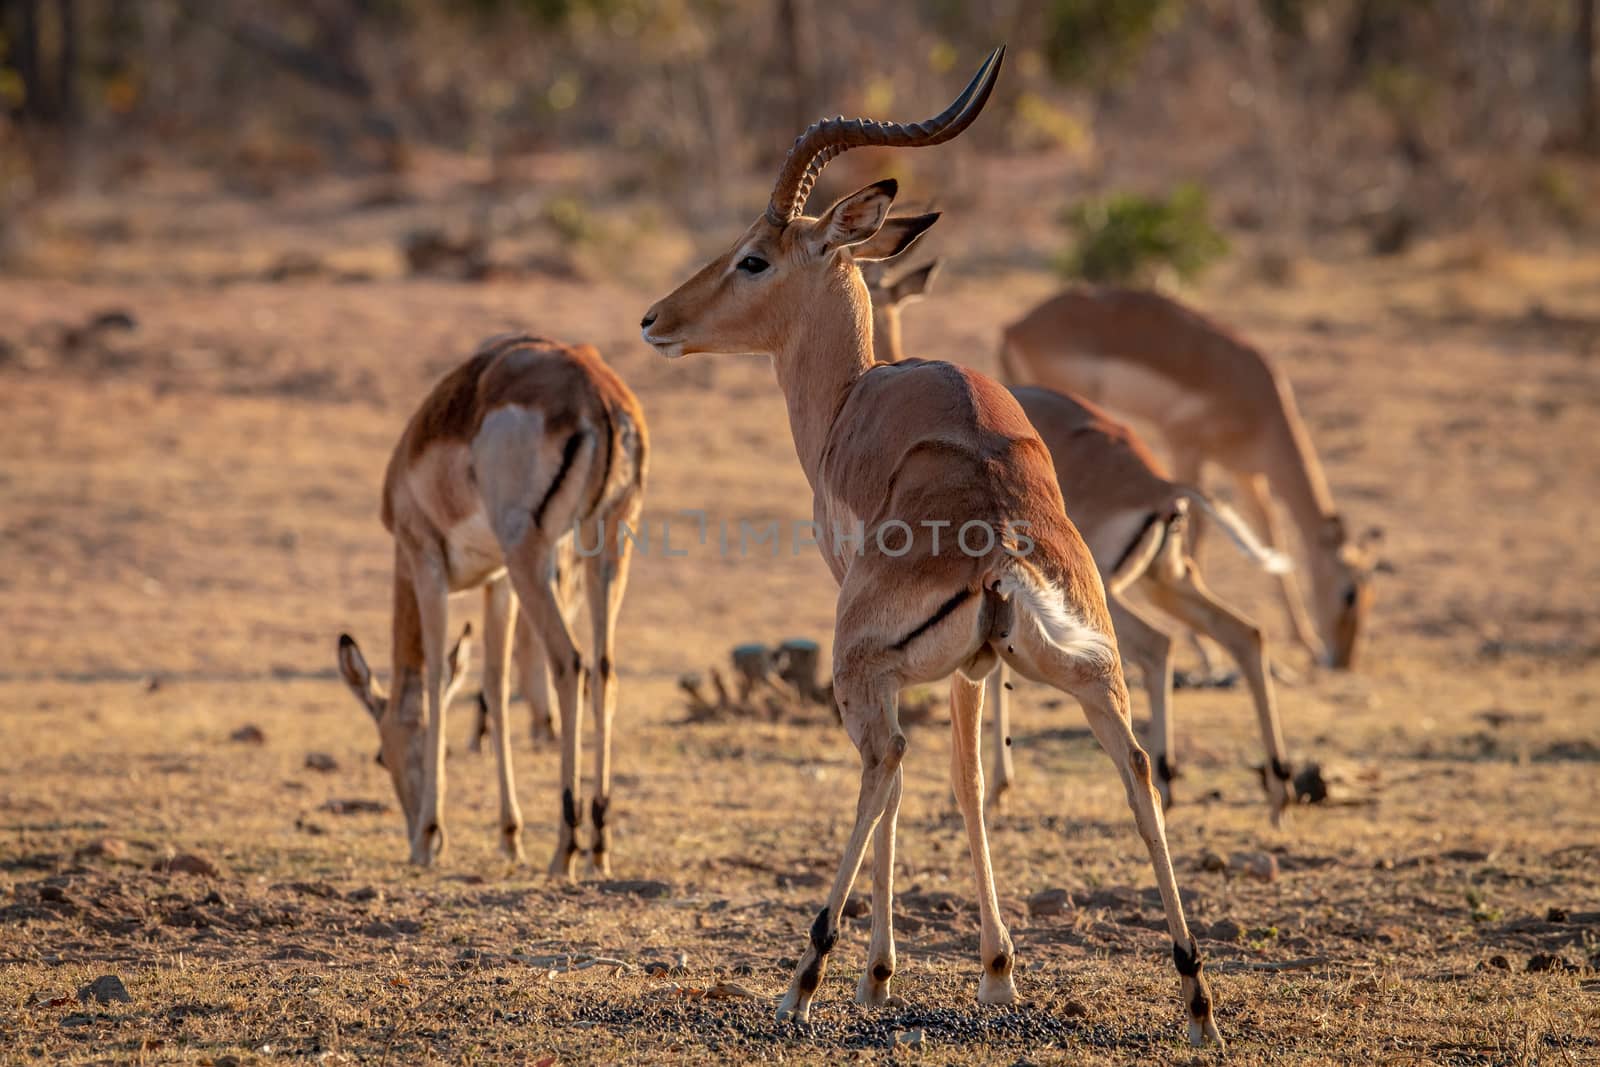 Male Impala defecating in the grass in the Welgevonden game reserve, South Africa.